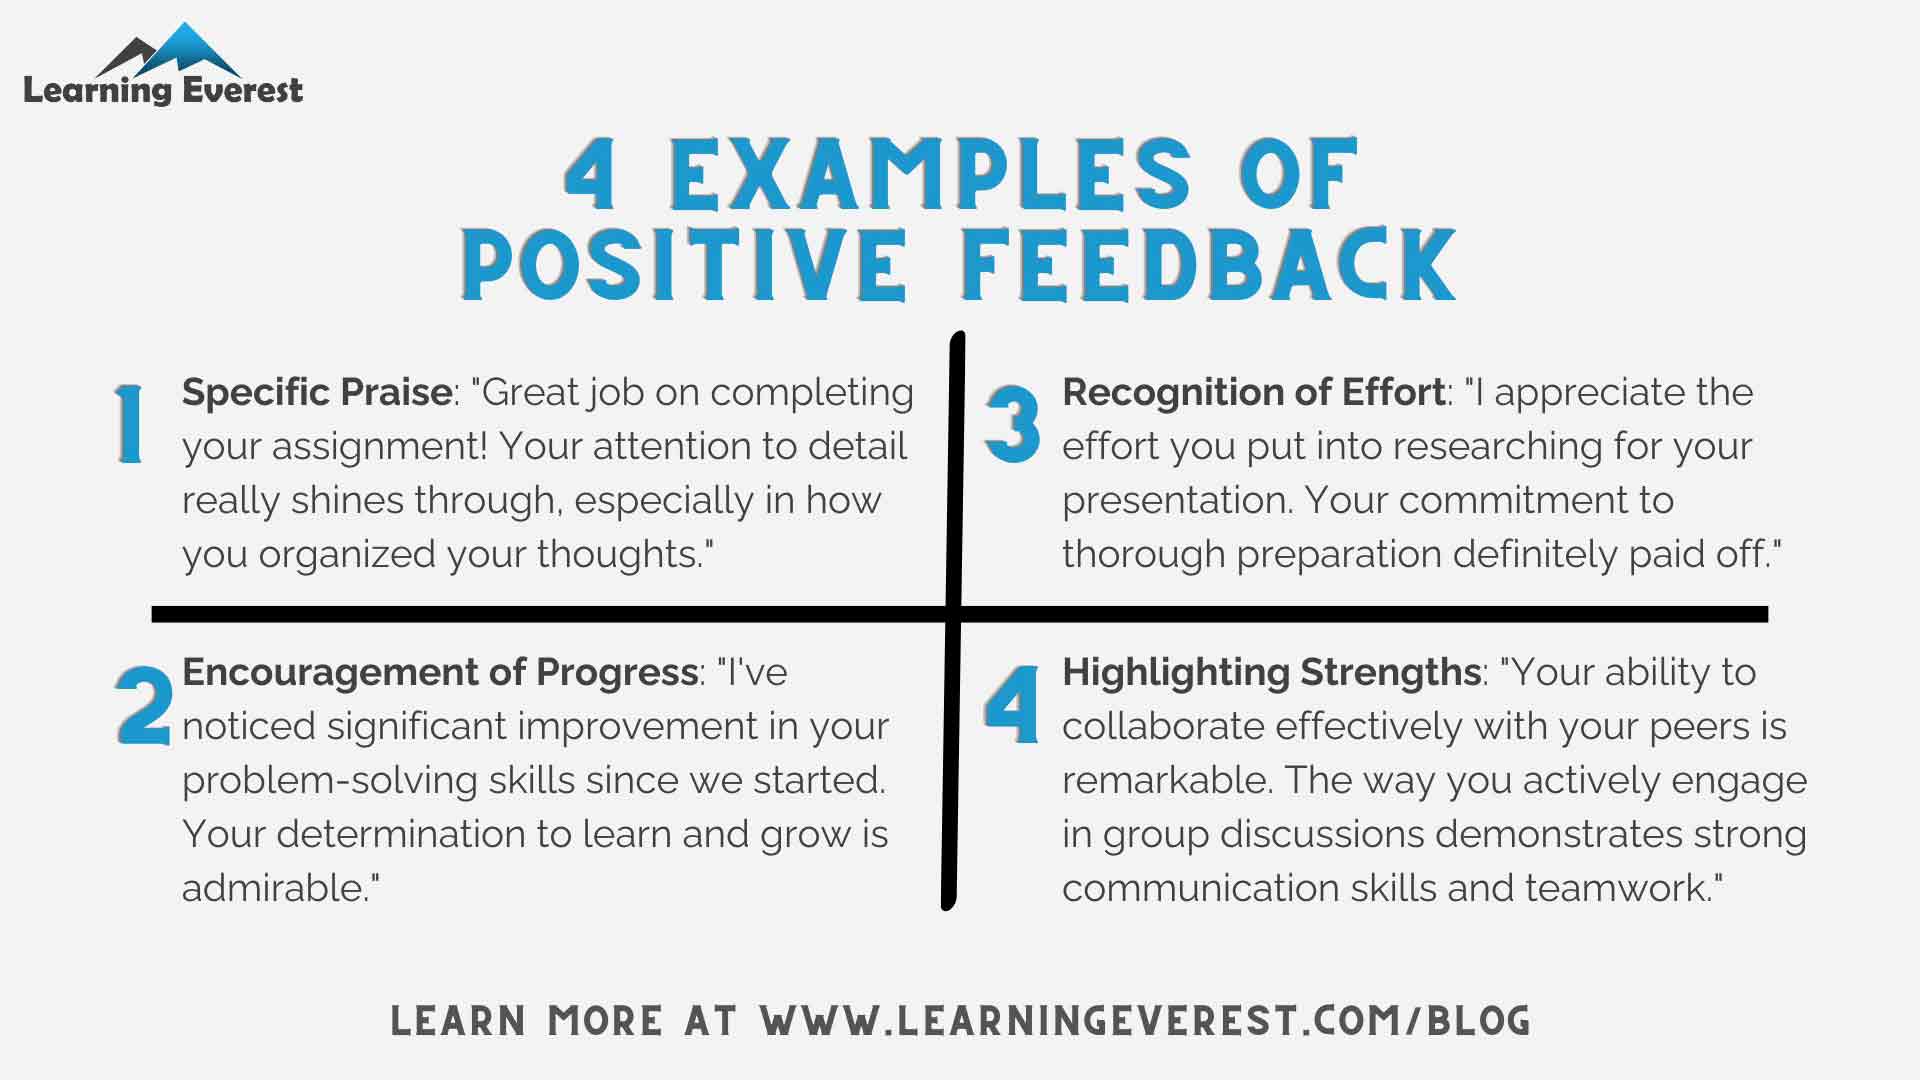 4 Examples of Positive Feedback